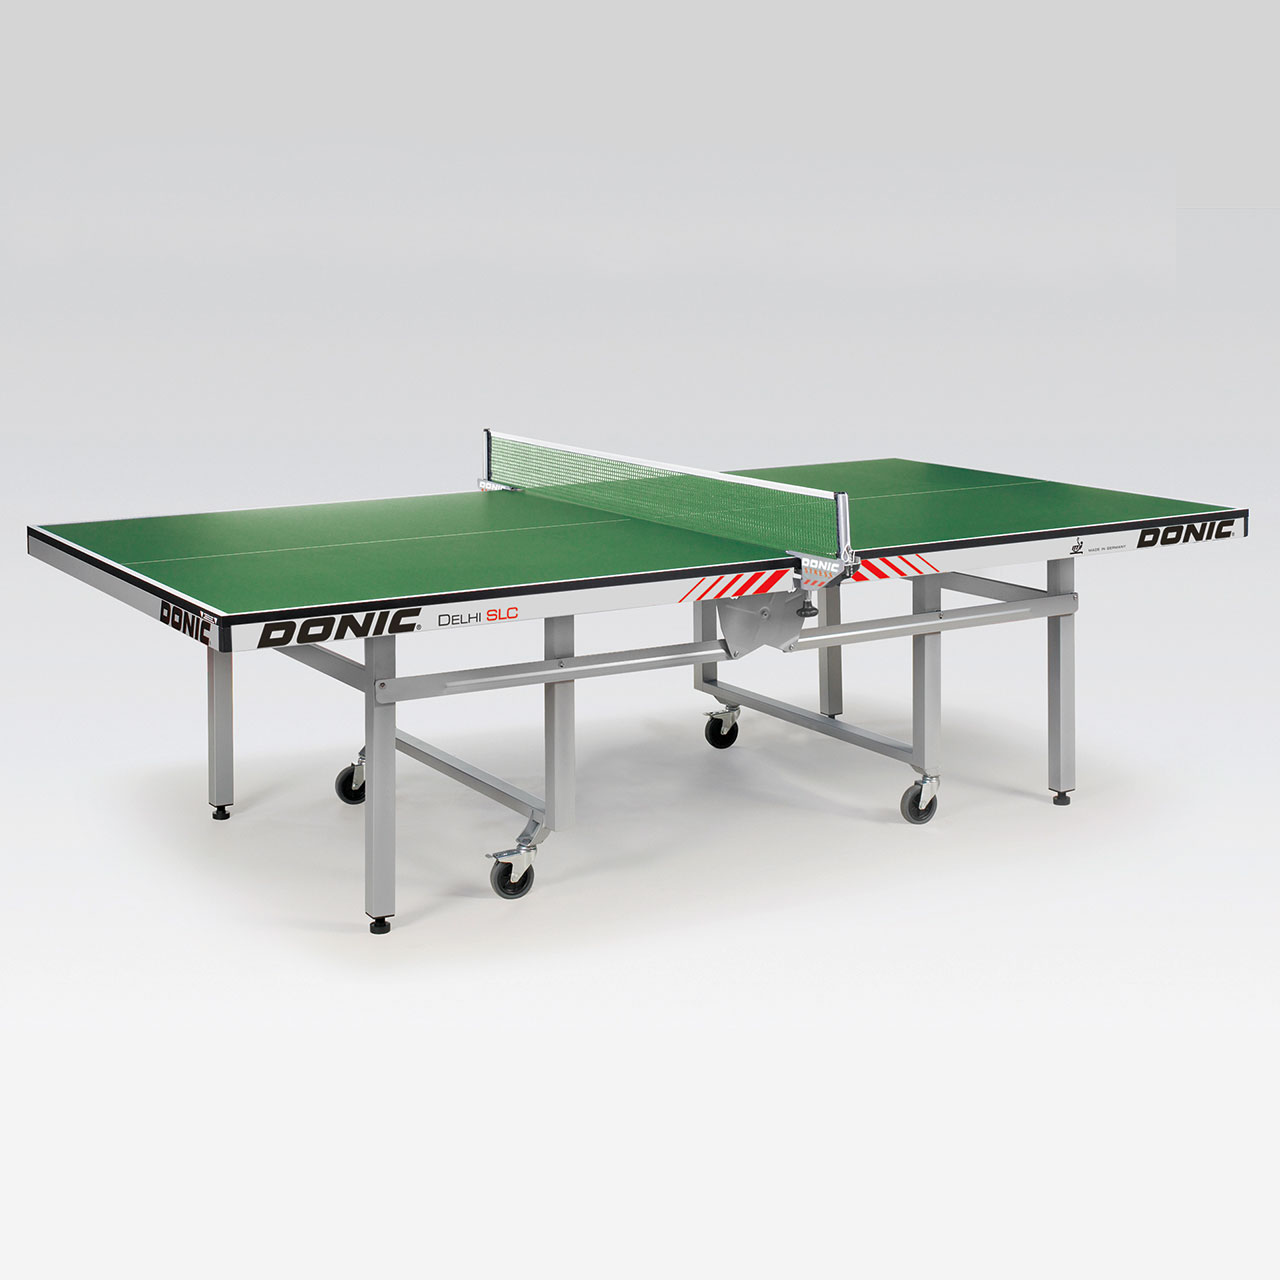 Donic Delhi SLC Table - Jarvis Sports | Table Tennis